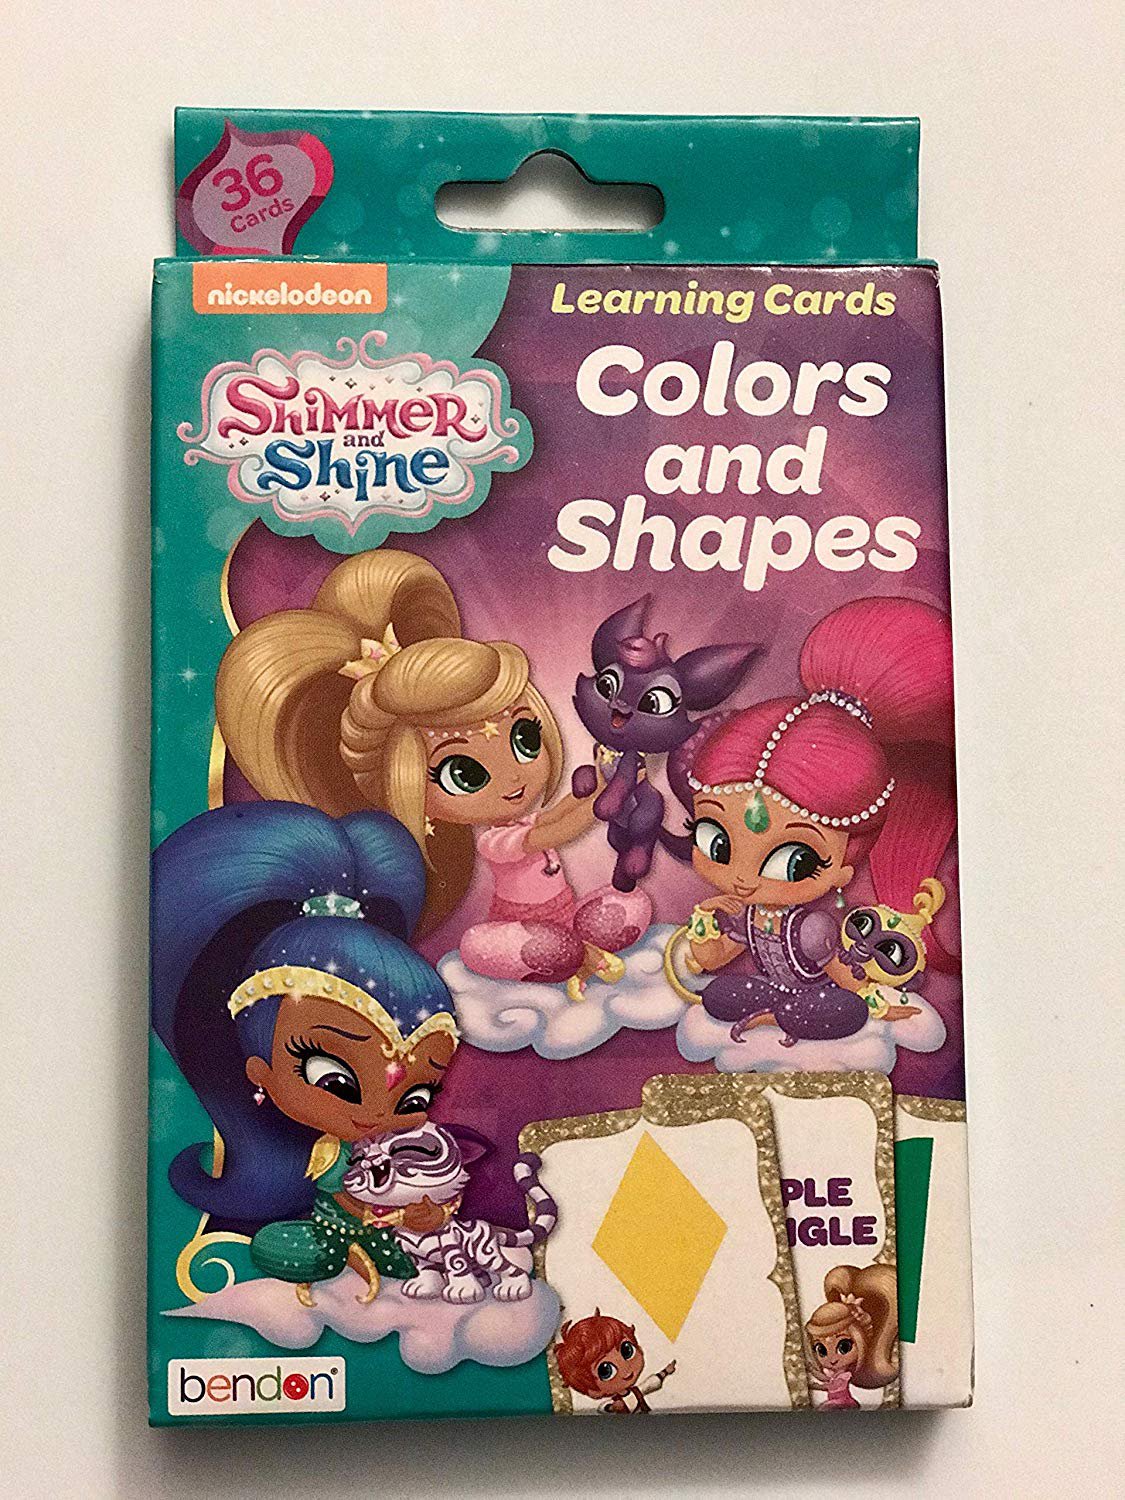 Shimmer & Shine Colors and Shapes Learning Cards